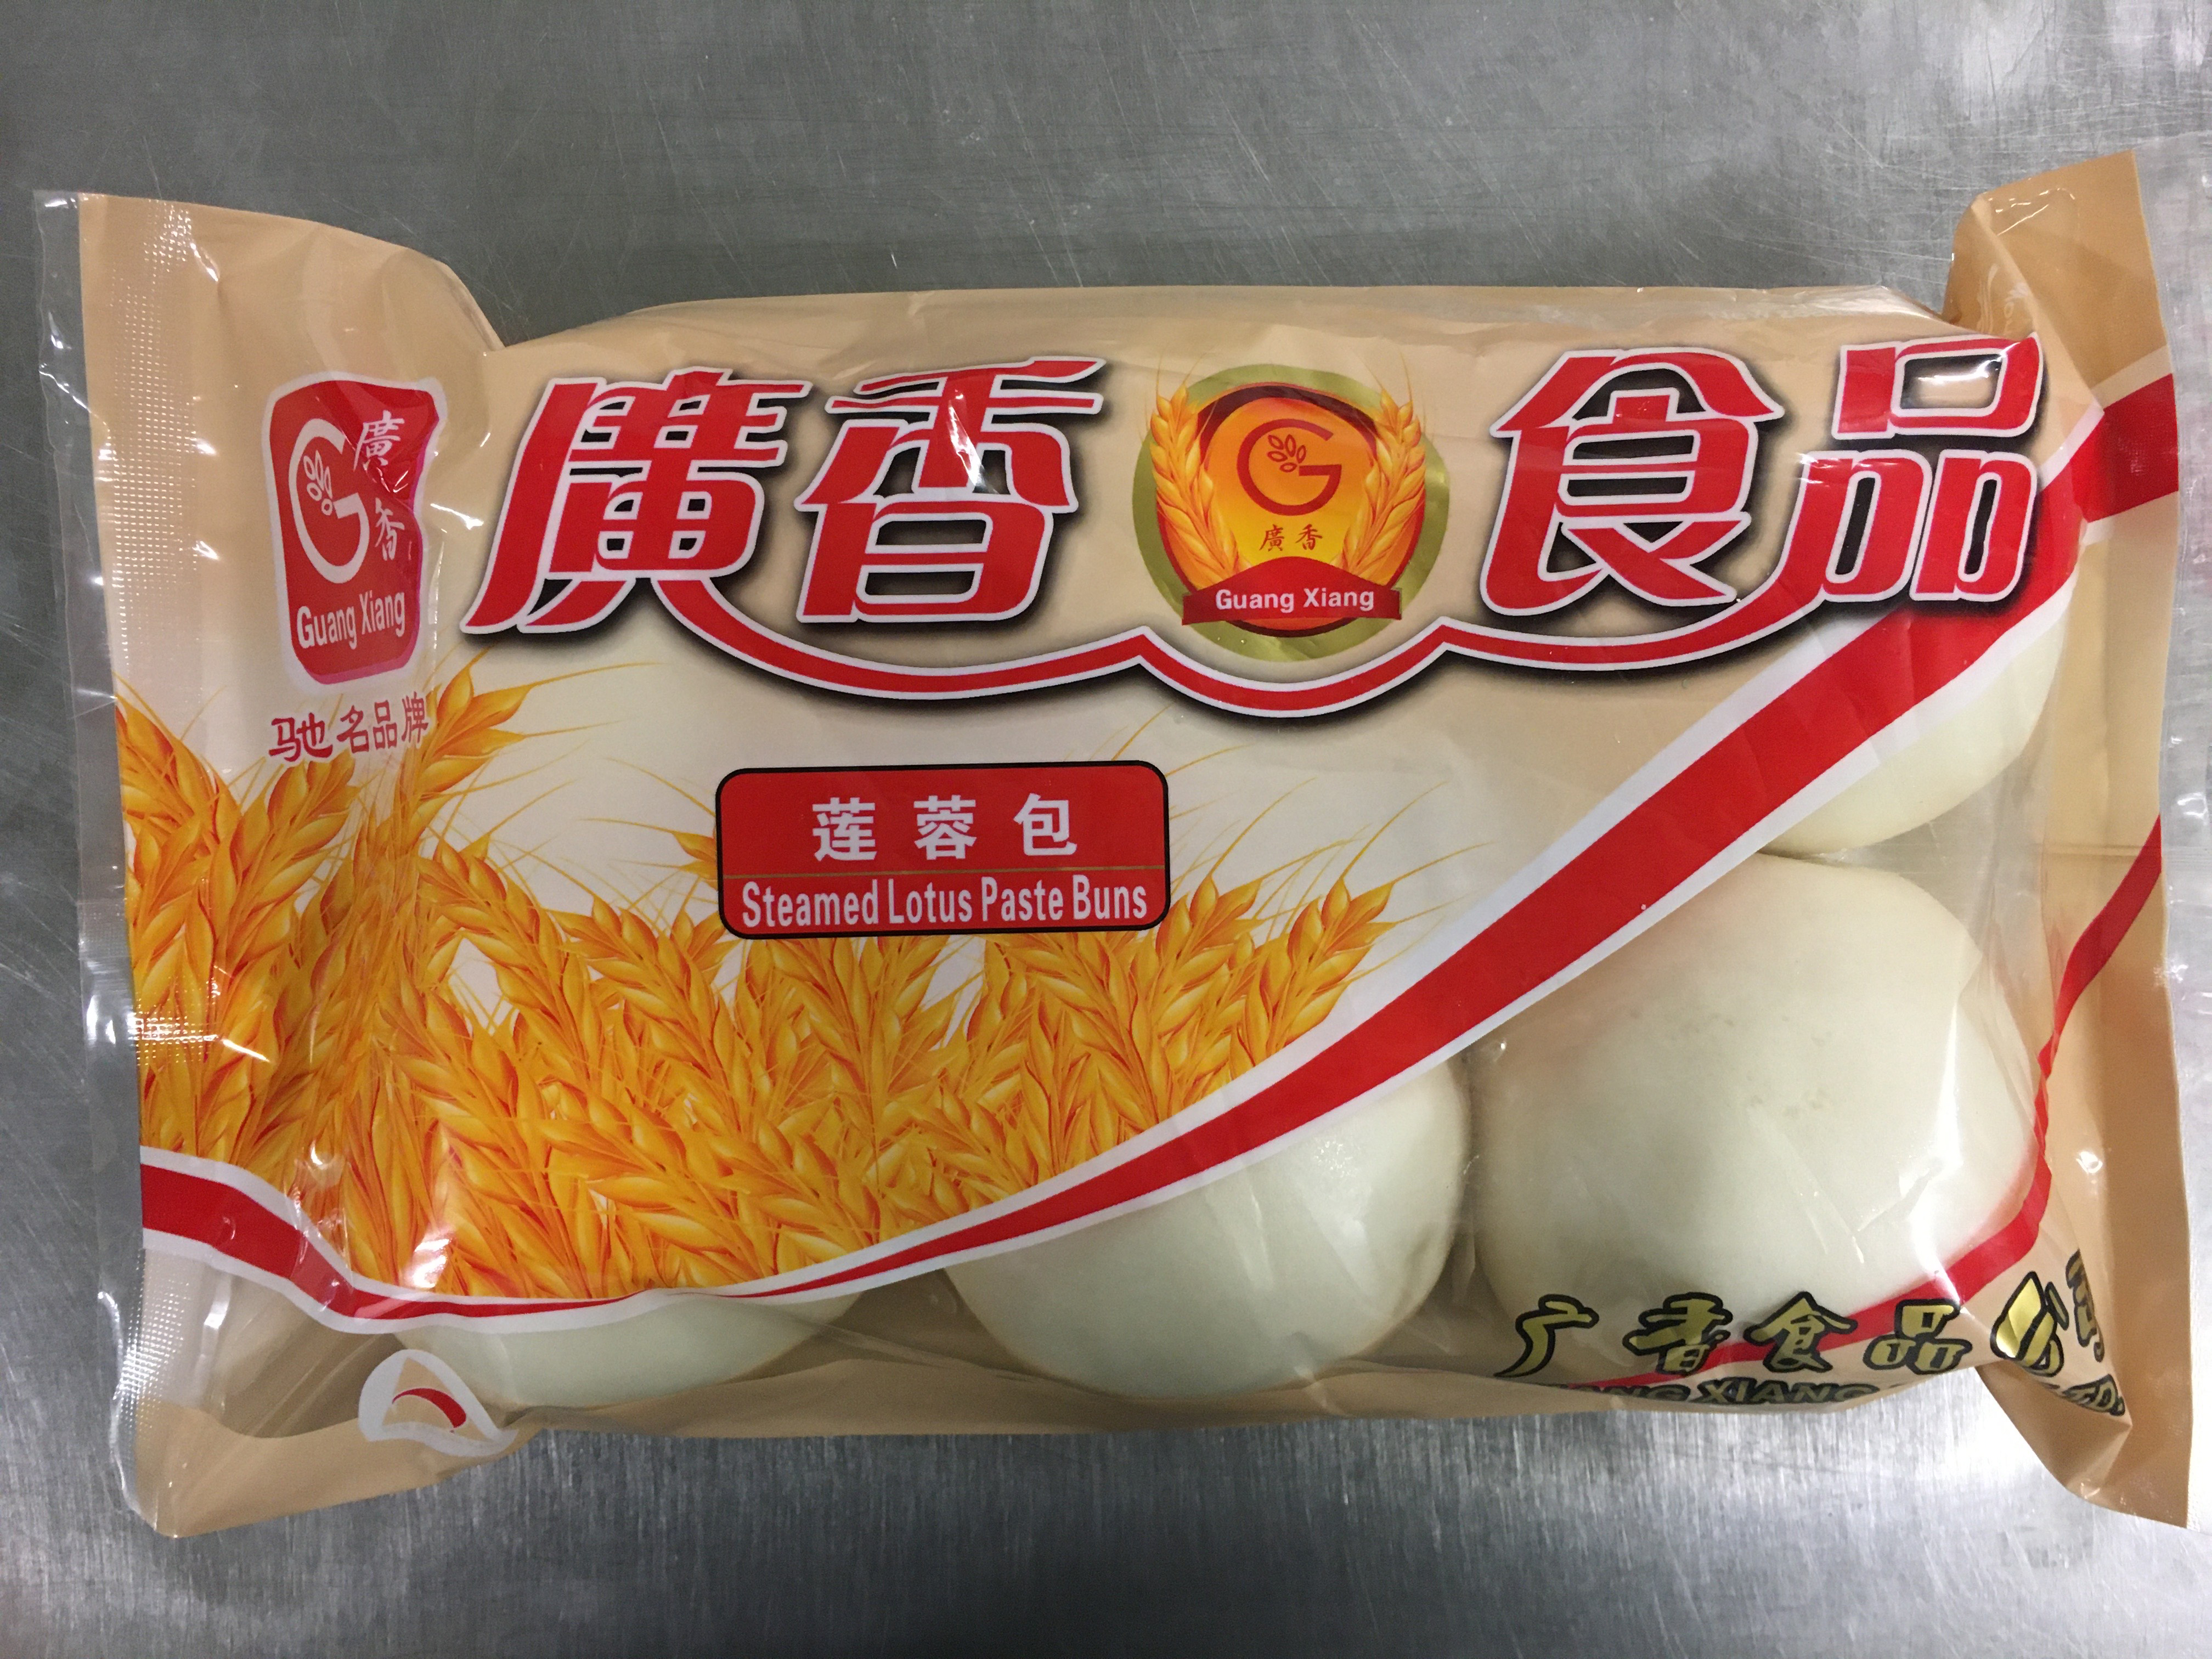 Image of Guangxiang brand Steamed Lotus Paste Buns (522g) in a plasti pack